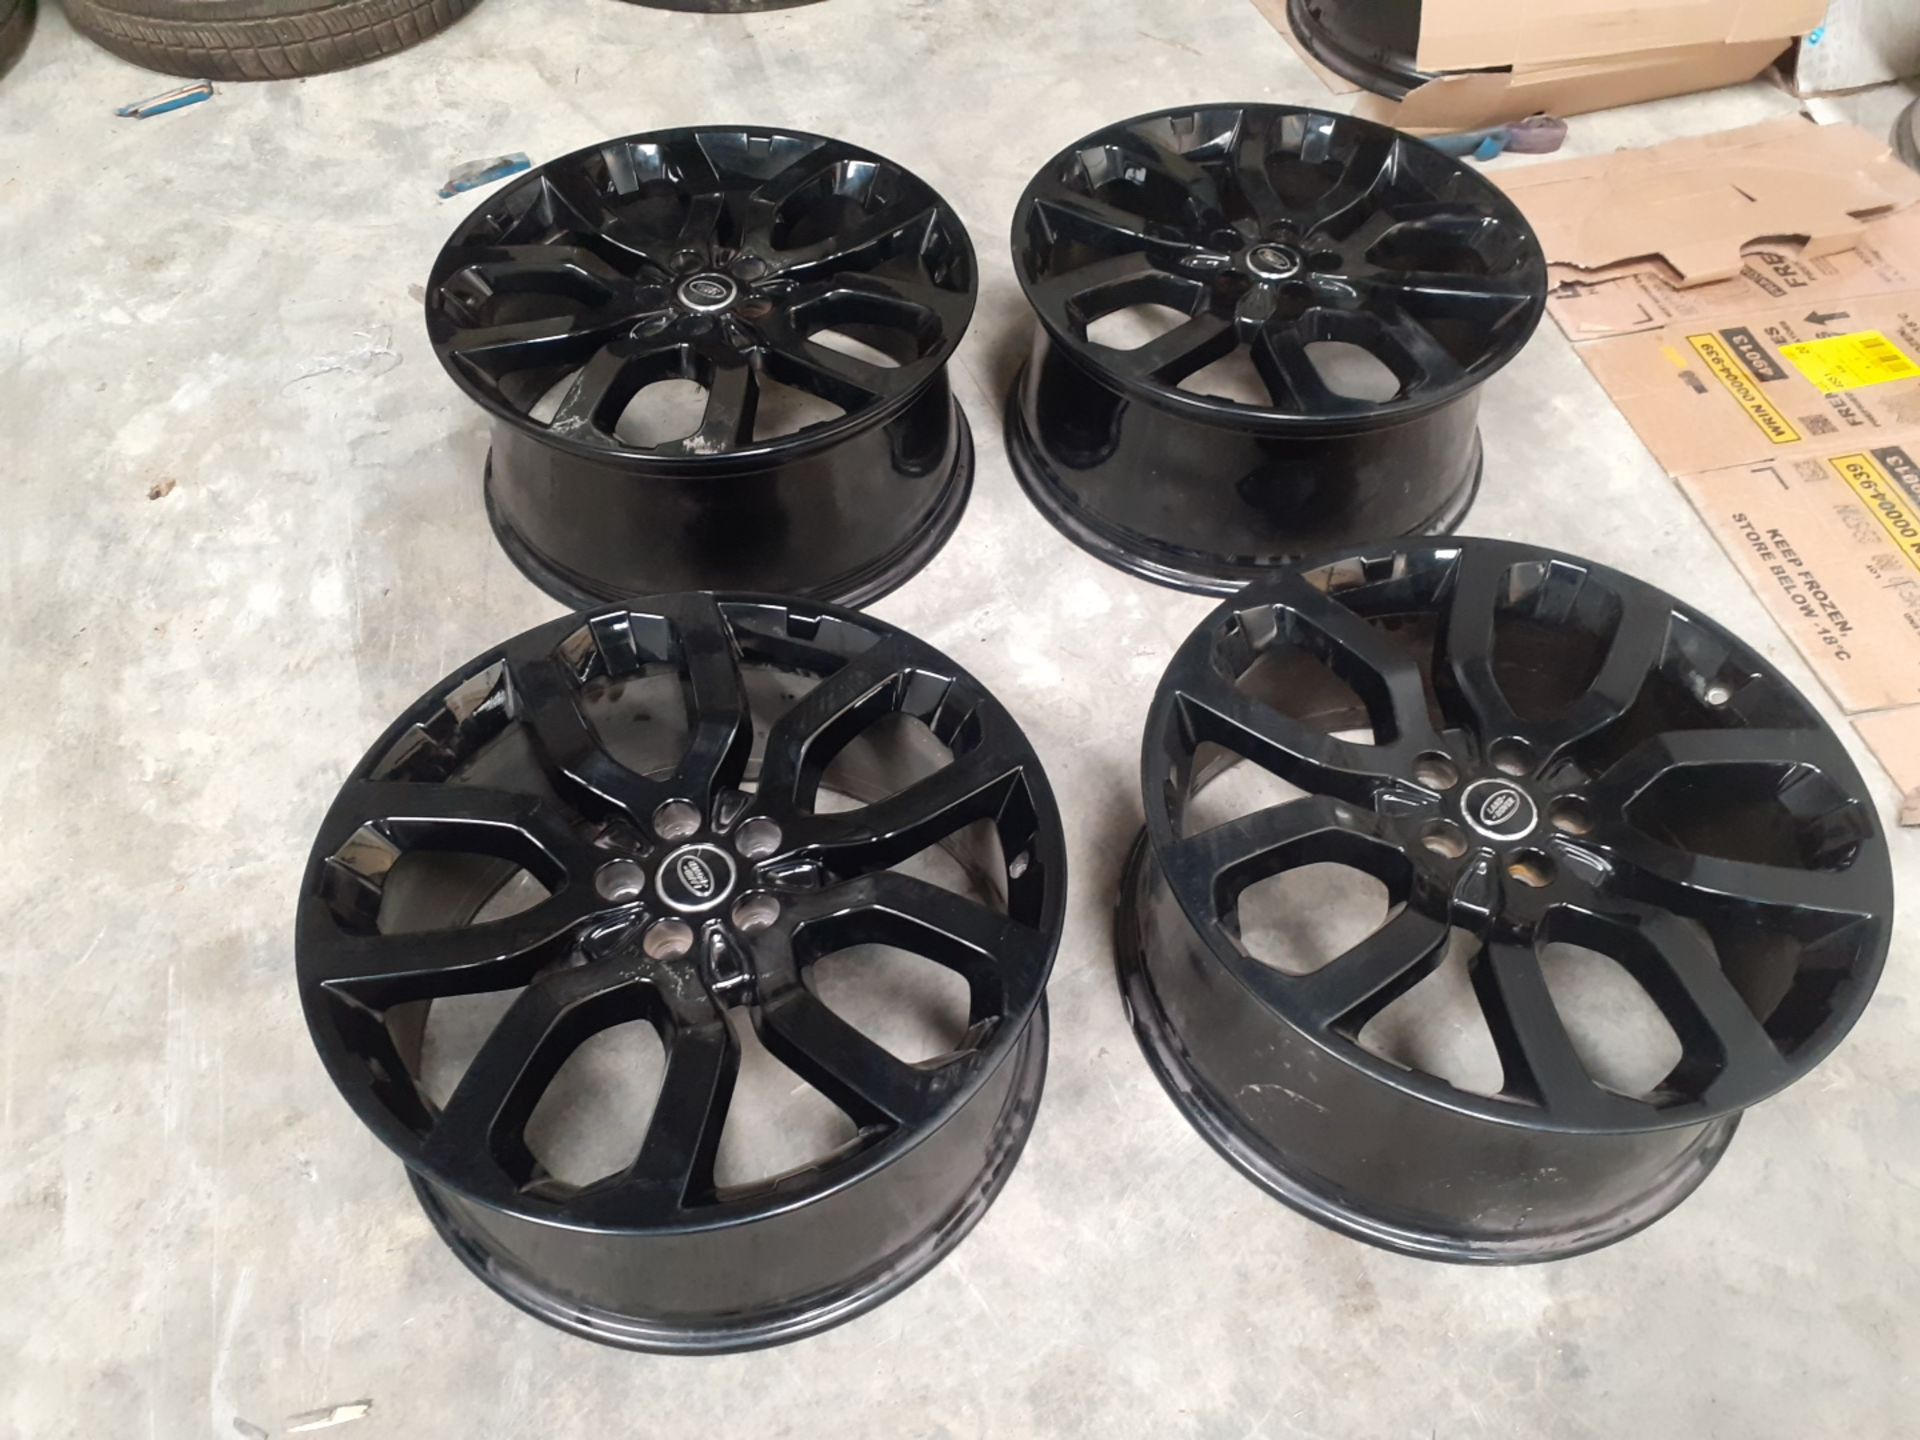 JOB LOT OF 30 SETS OF ALLOY WHEELS WITH TYRES, LAND ROVER RANGE ROVER, OVER £31K RRP *NO VAT* - Image 4 of 17